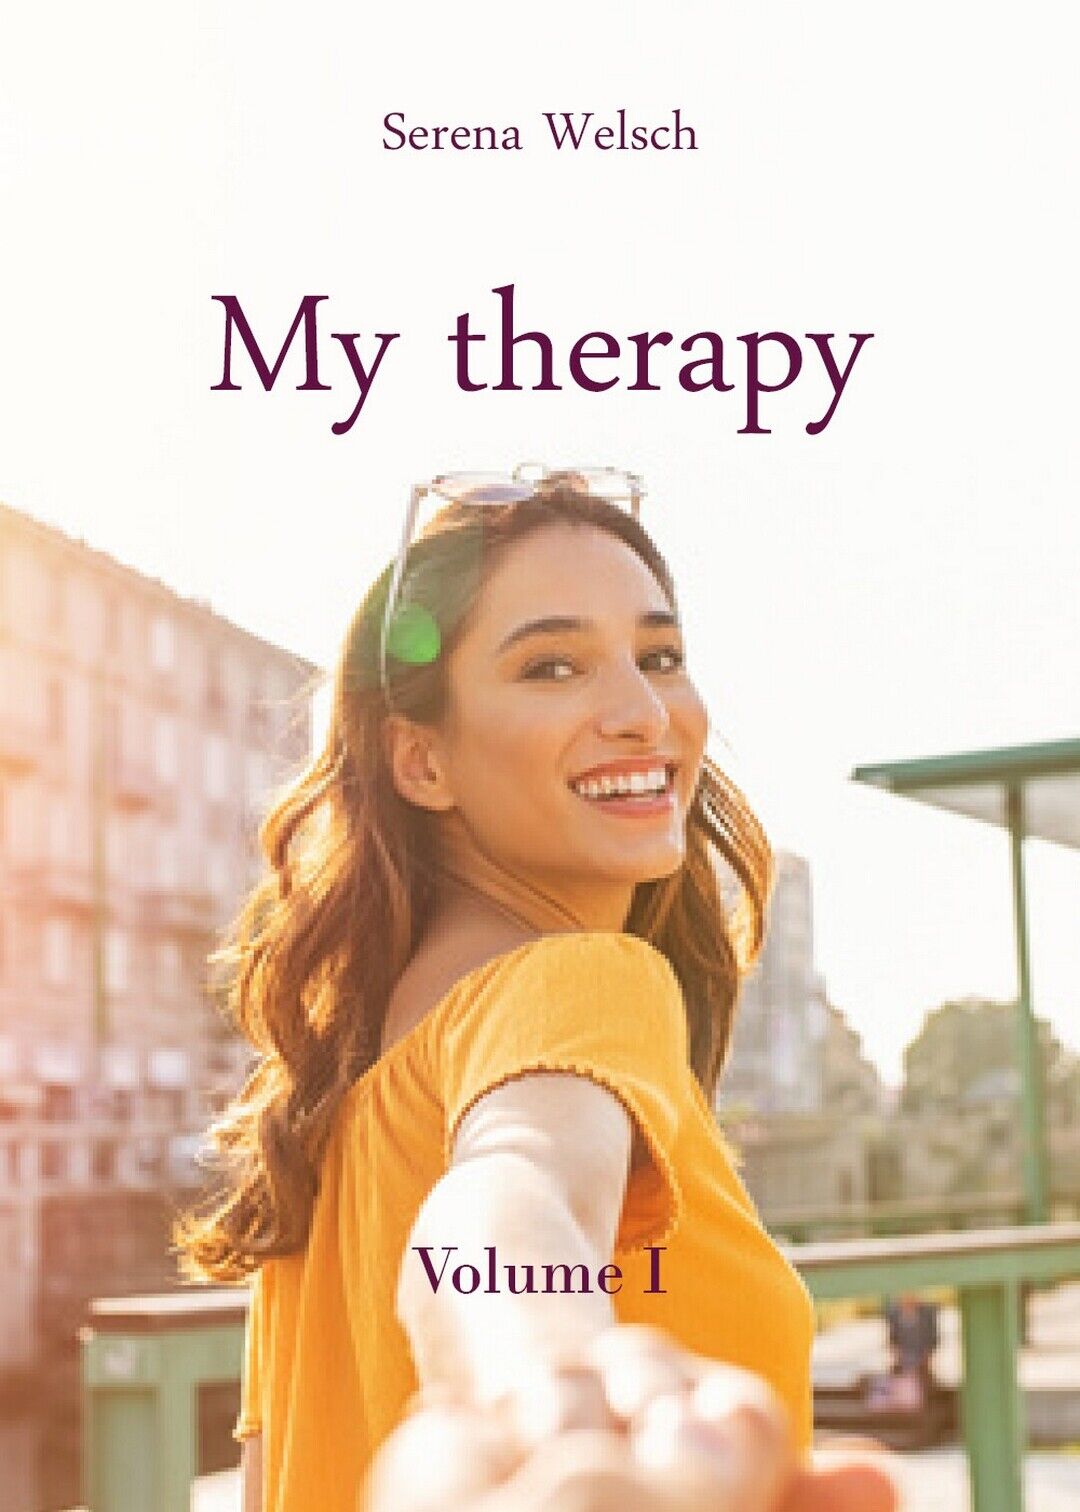 My therapy - Volume I  di Serena Welsch,  2019,  Youcanprint